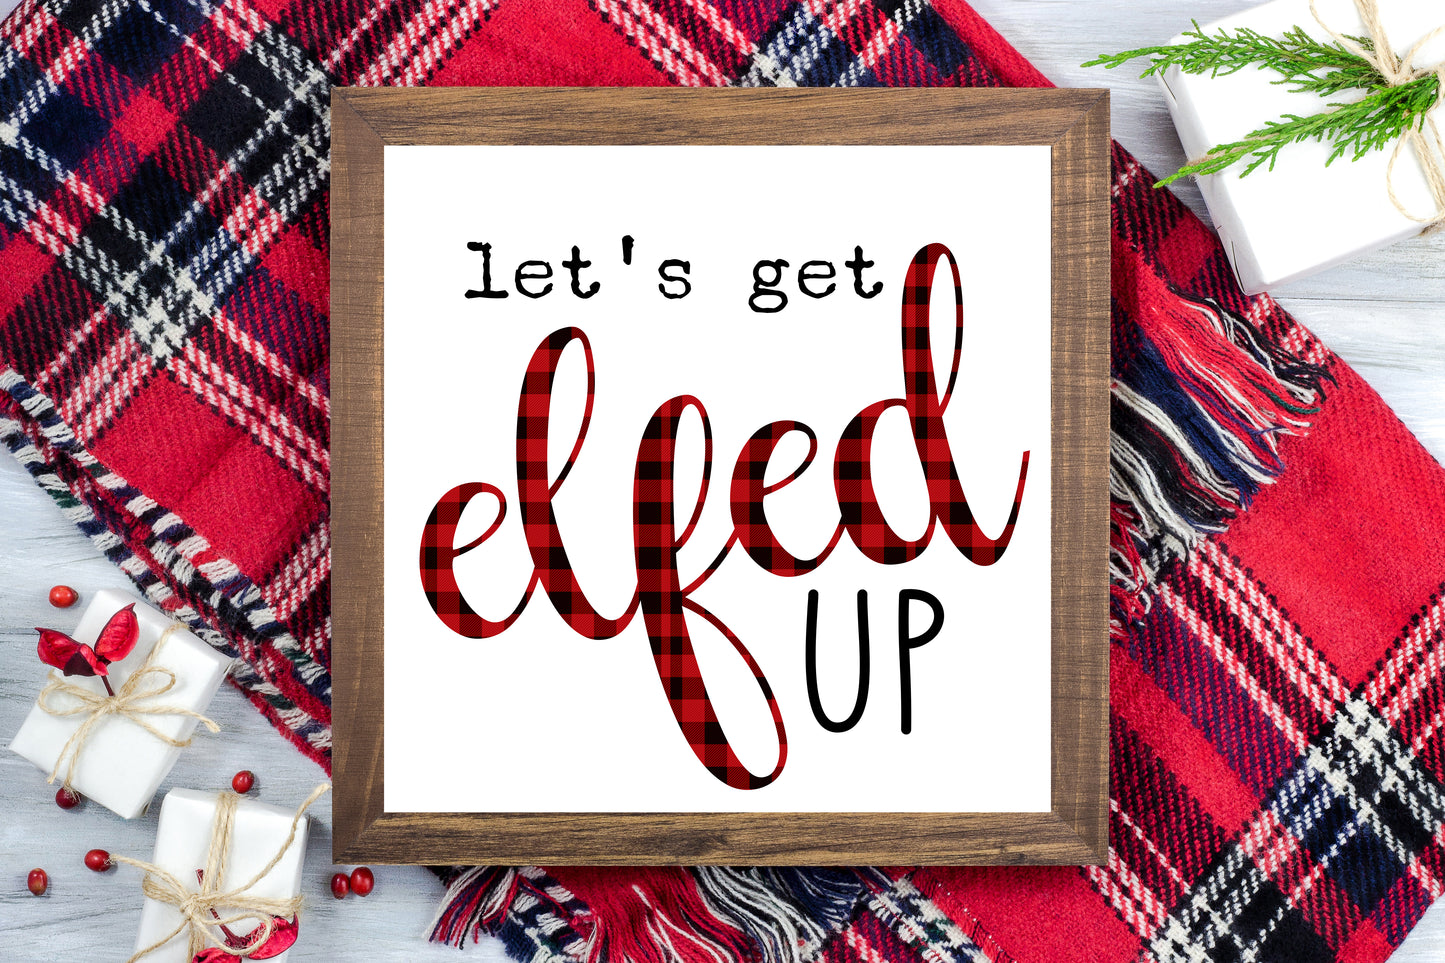 Let's get Elfed up - Funny Christmas Decor Printable Sign Farmhouse Style  - Digital File